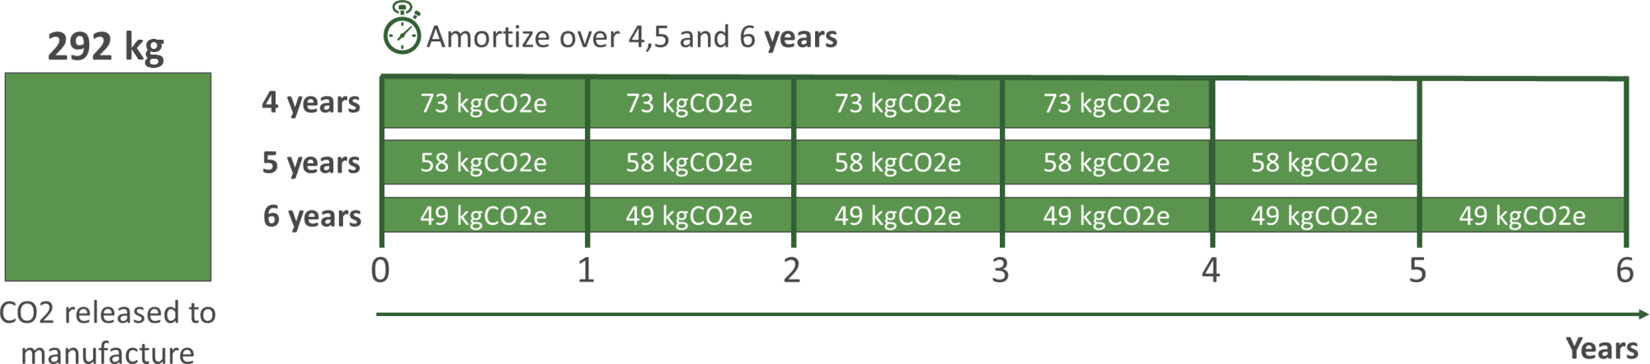 Figure 6.13 – Amortizing a laptop’s carbon emission over 4, 5, and 6 years
